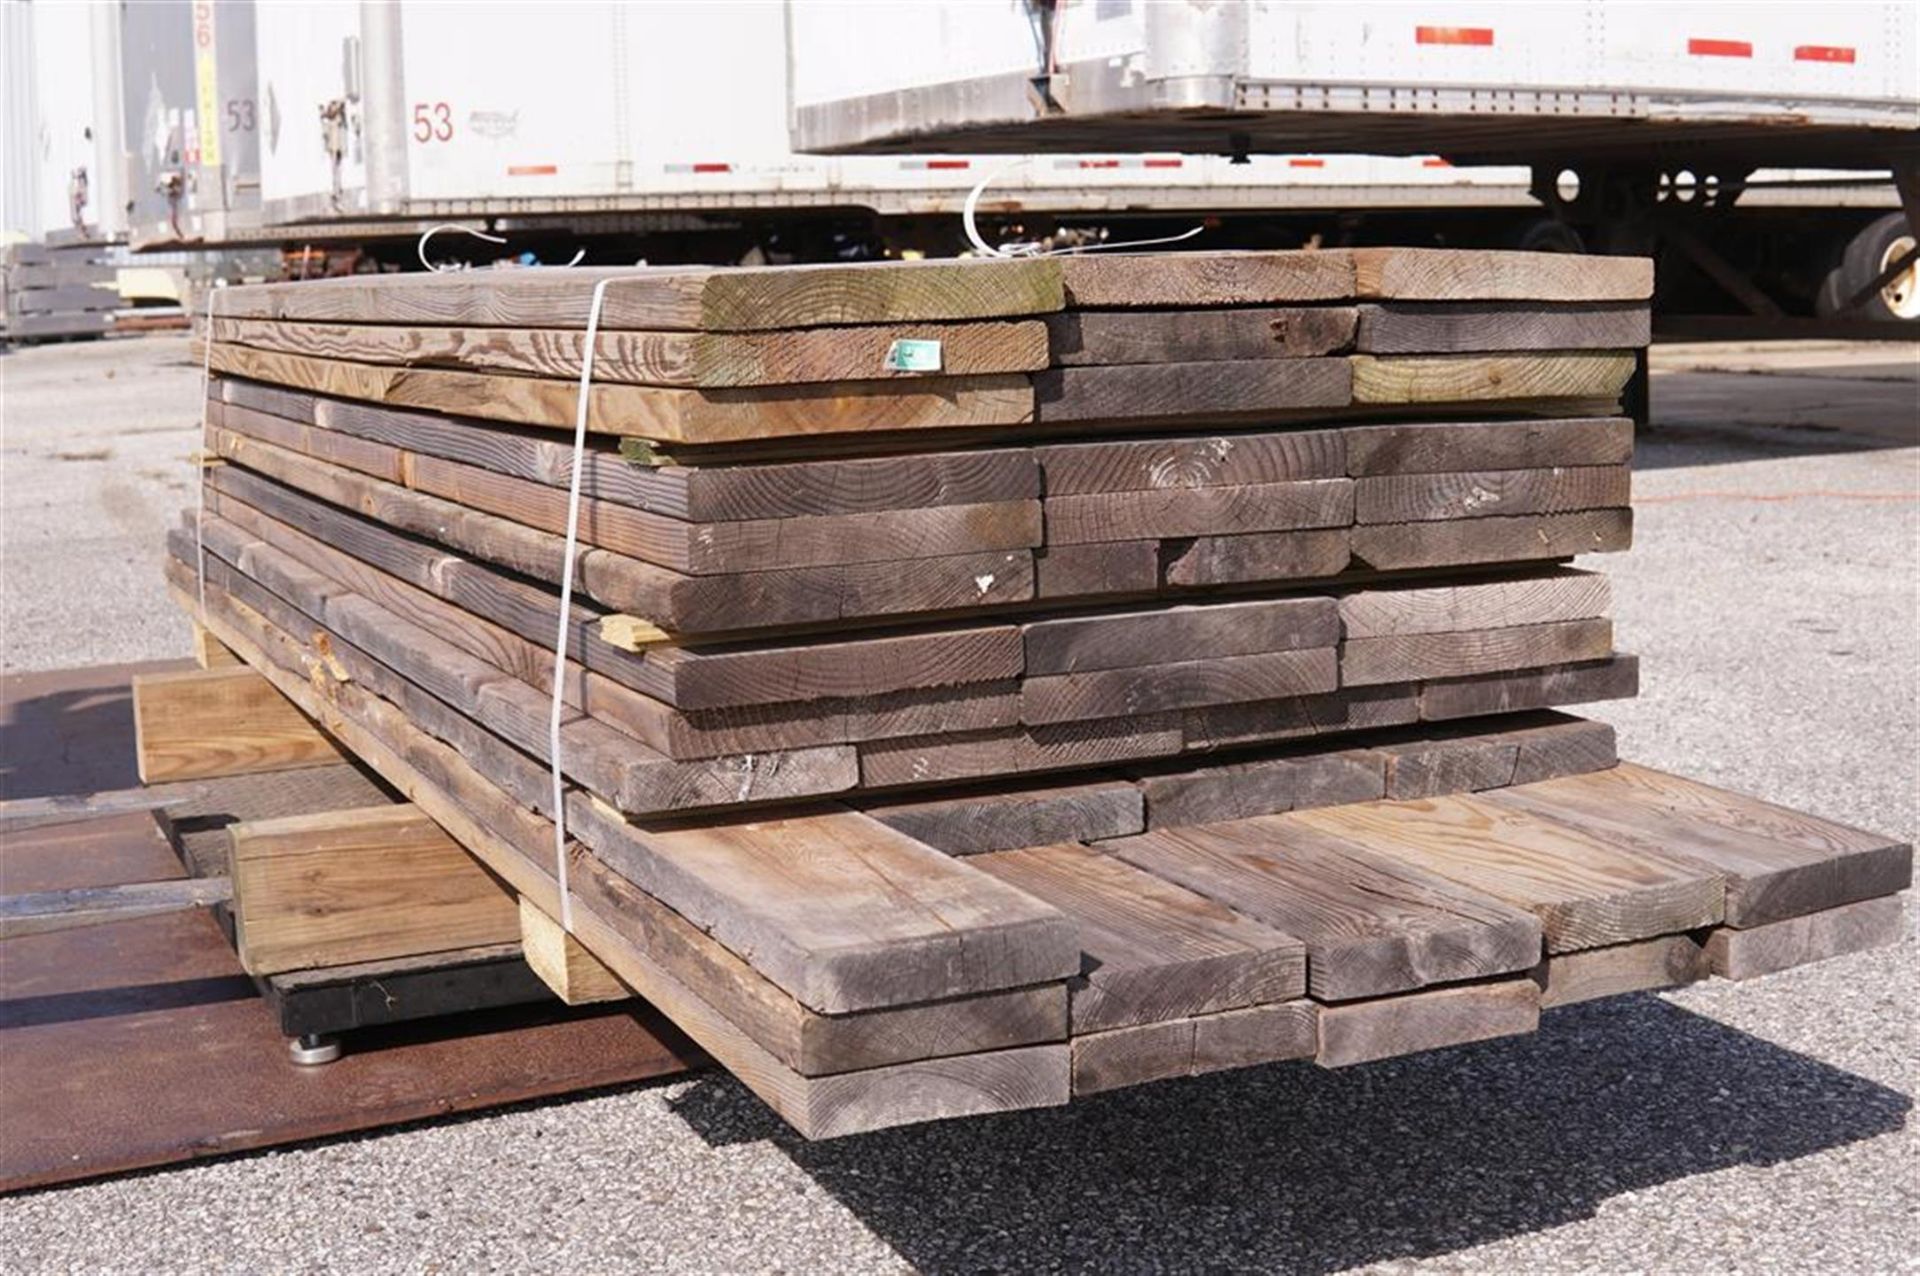 11PC 2X12, 30PC 2X8, 8-10 FT.- (LOADING FEE - $25) - Image 5 of 5